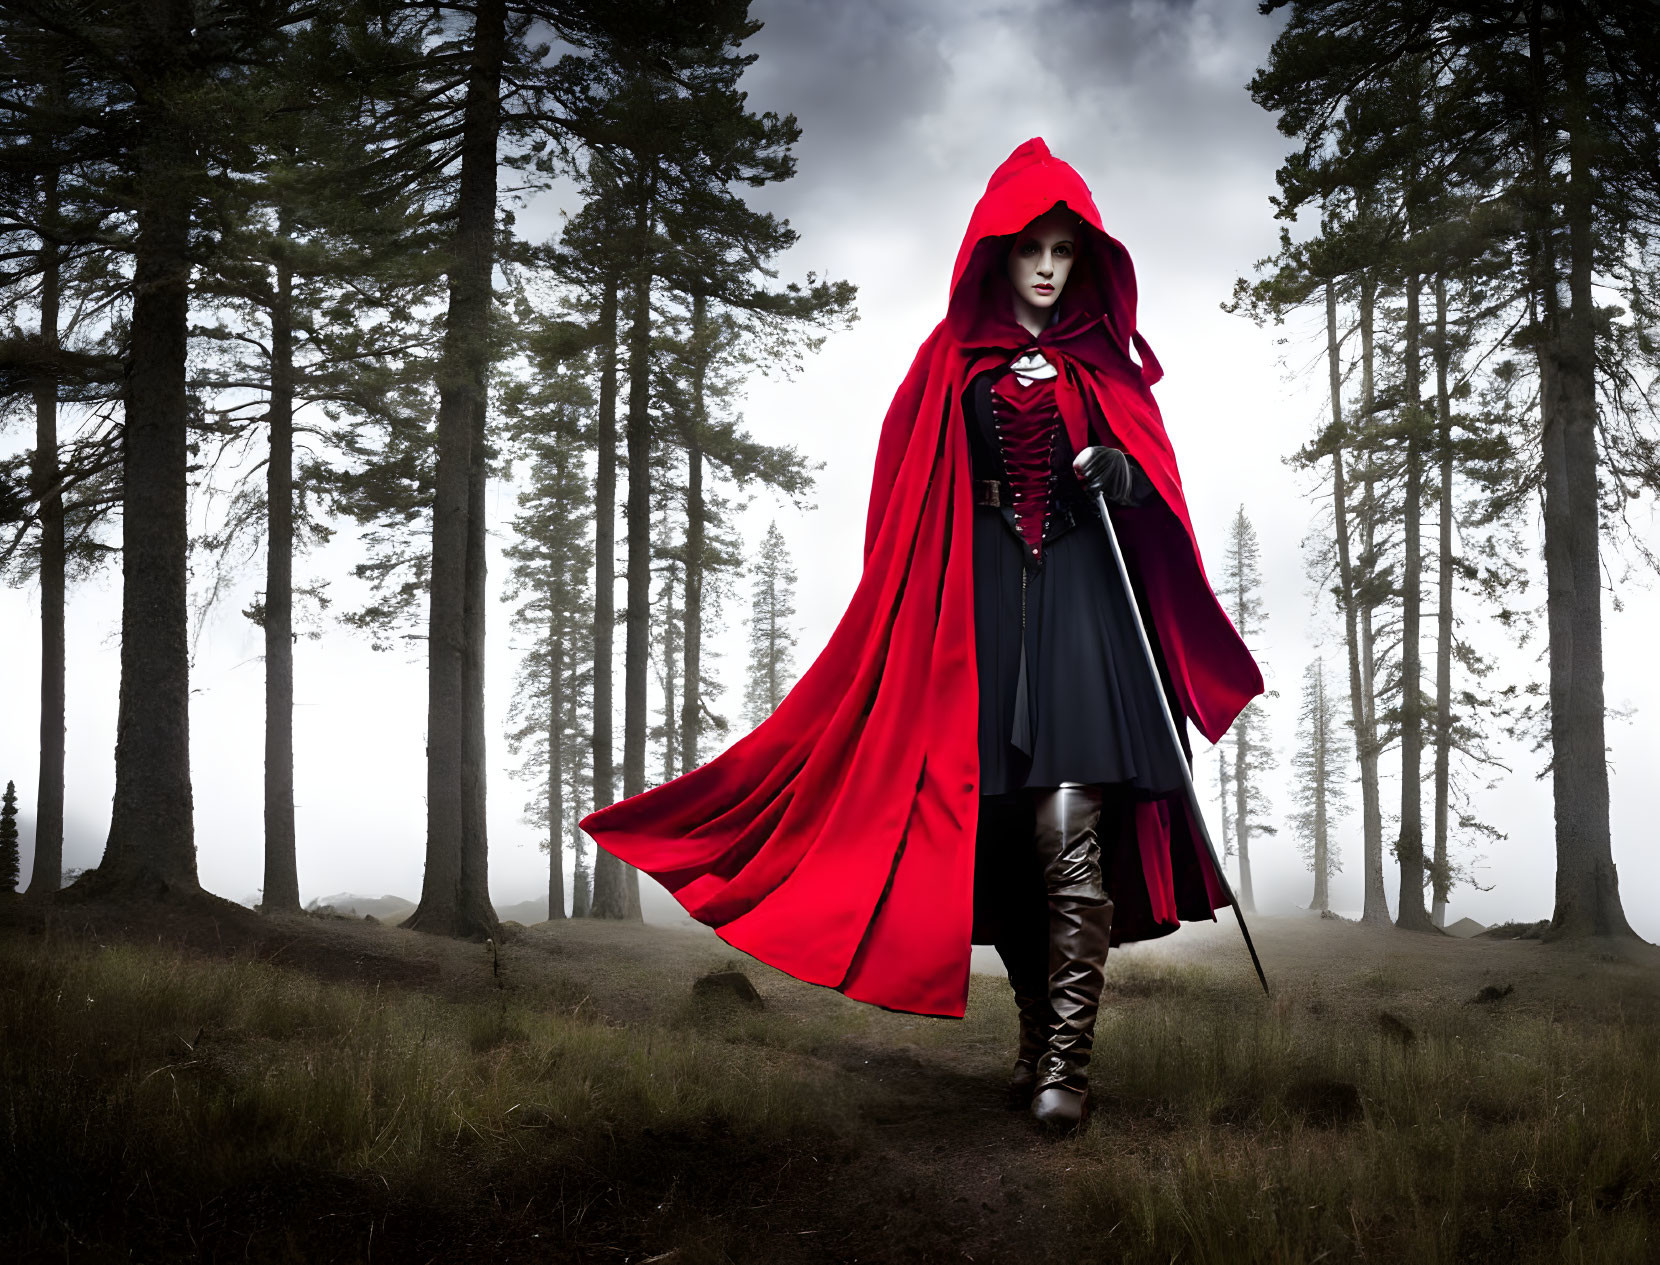 Person in Red Cloak Stands in Misty Forest with Fairy Tale Vibes